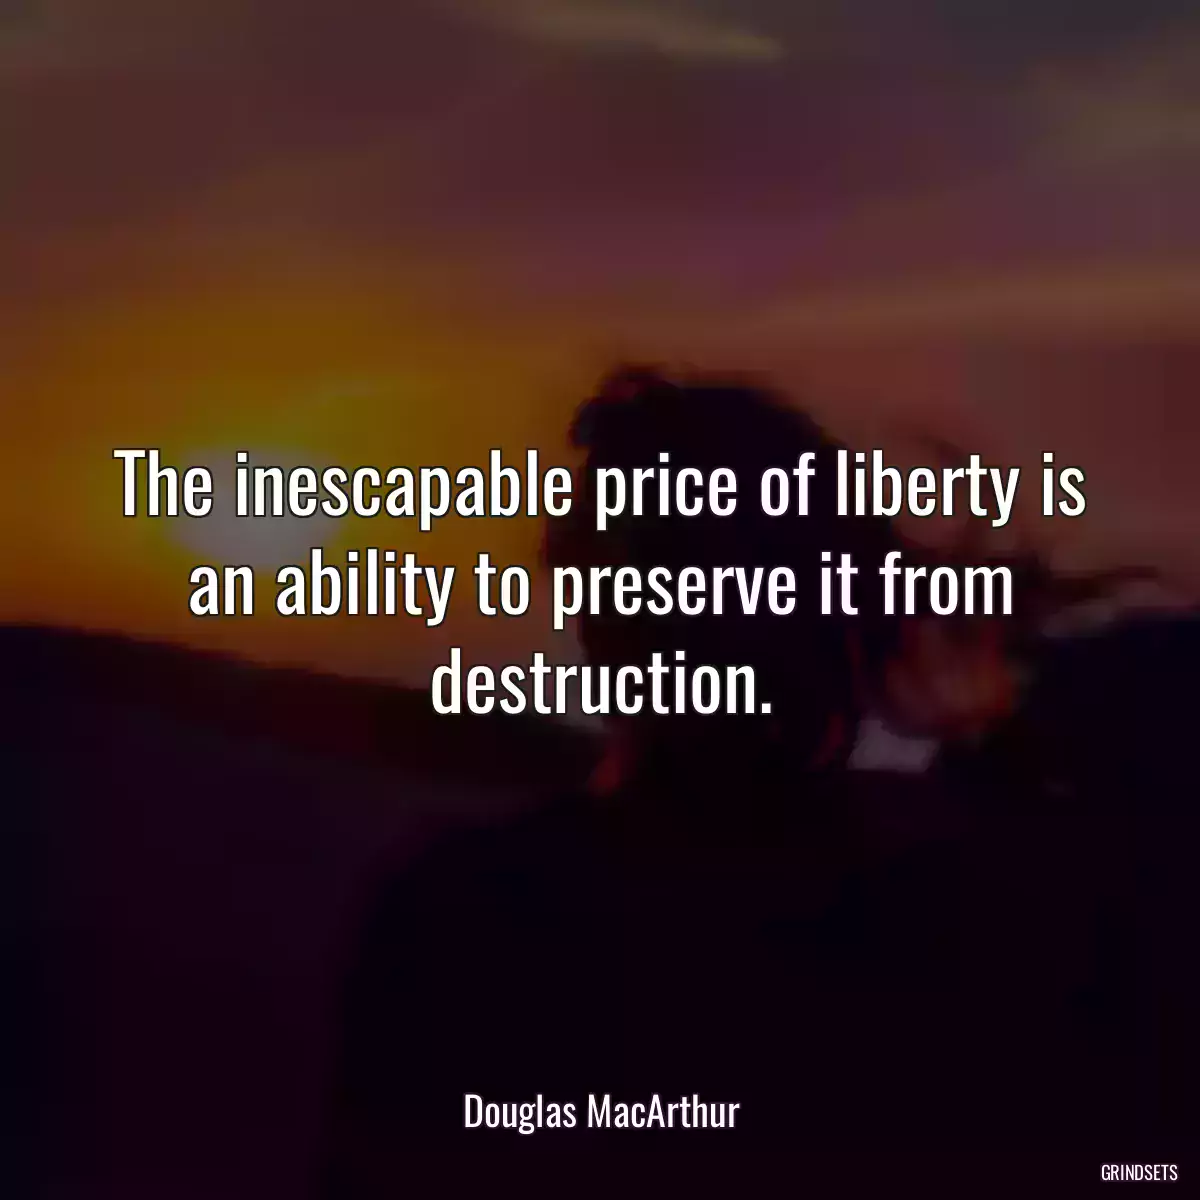 The inescapable price of liberty is an ability to preserve it from destruction.